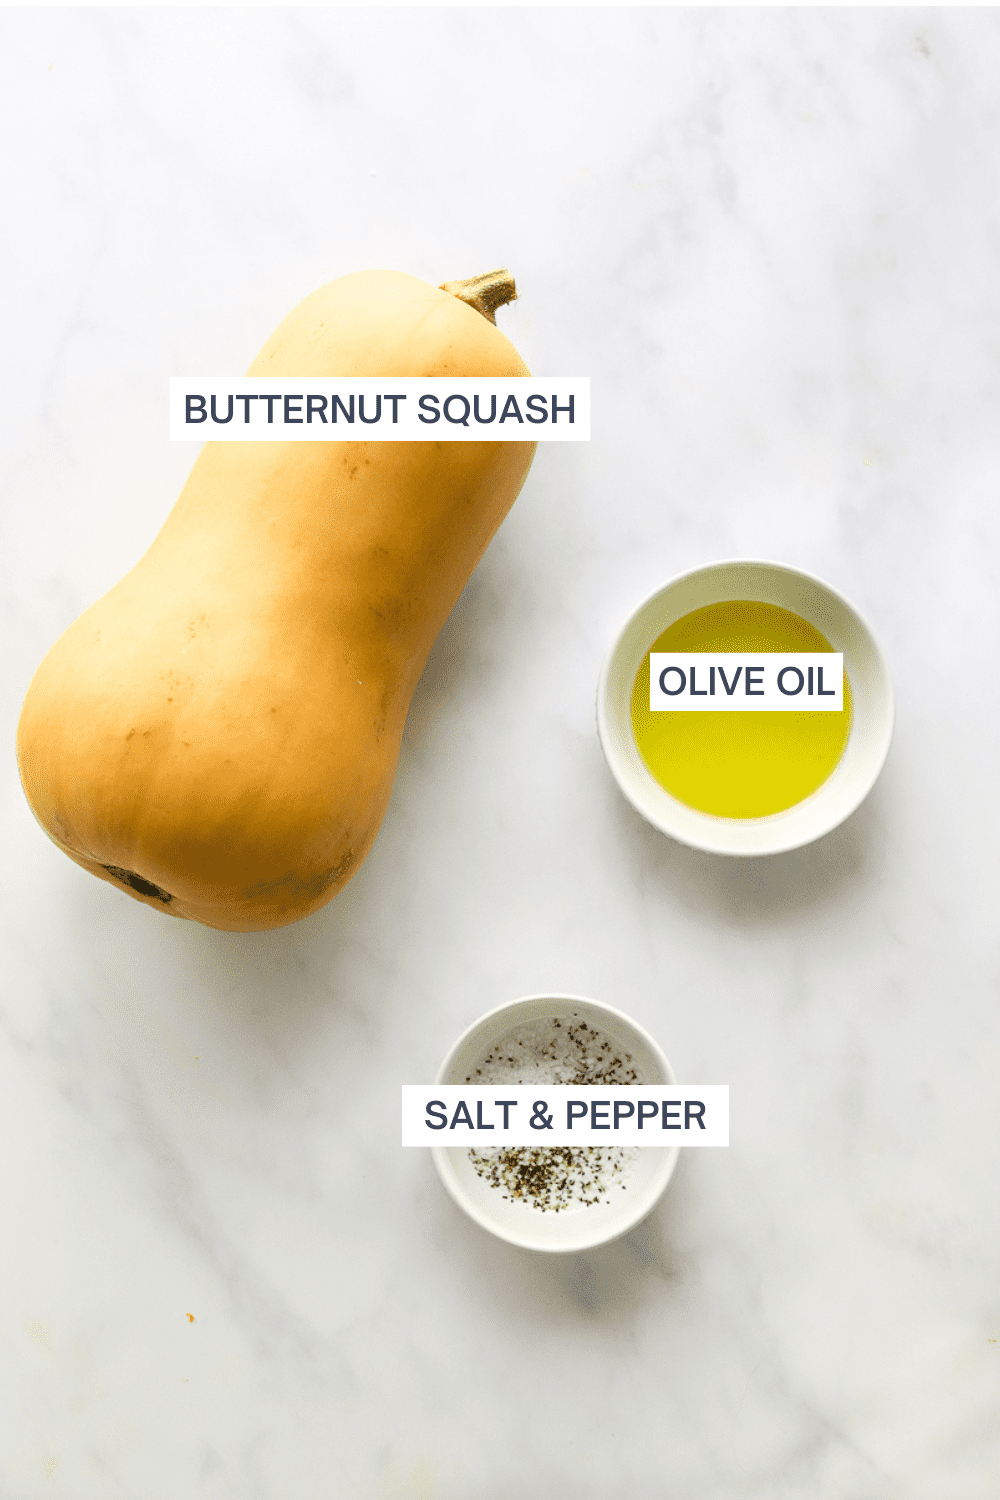 Whole butternut squash with a small white bowl filled with olive oil next to it and a small white bowl filled with salt and pepper in front of it. 